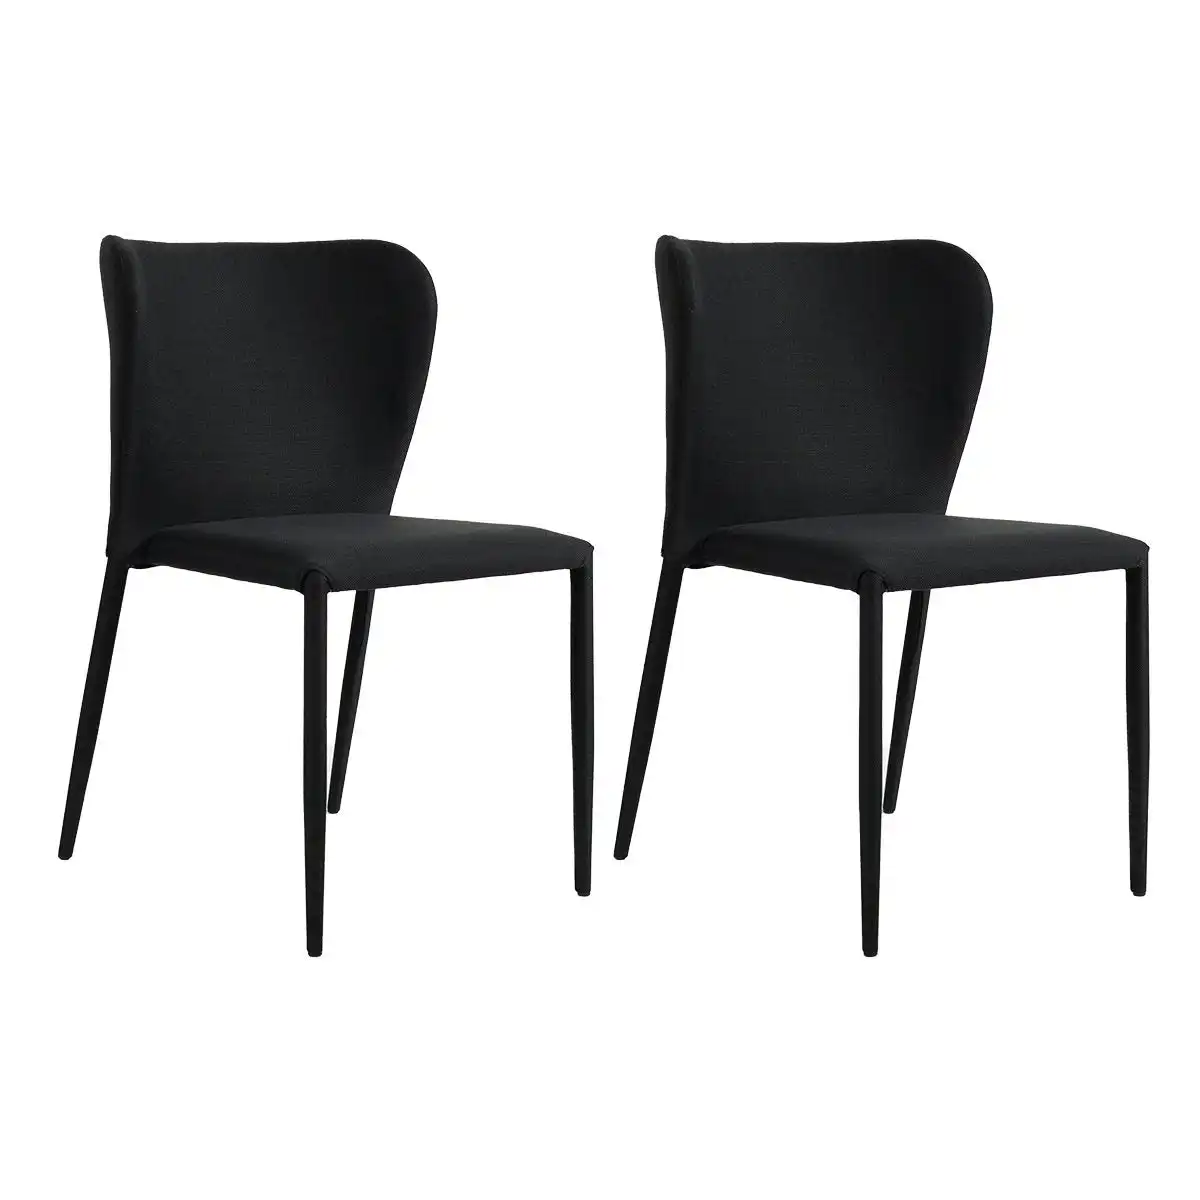 Foley Dining Chair Set of 2 - Black